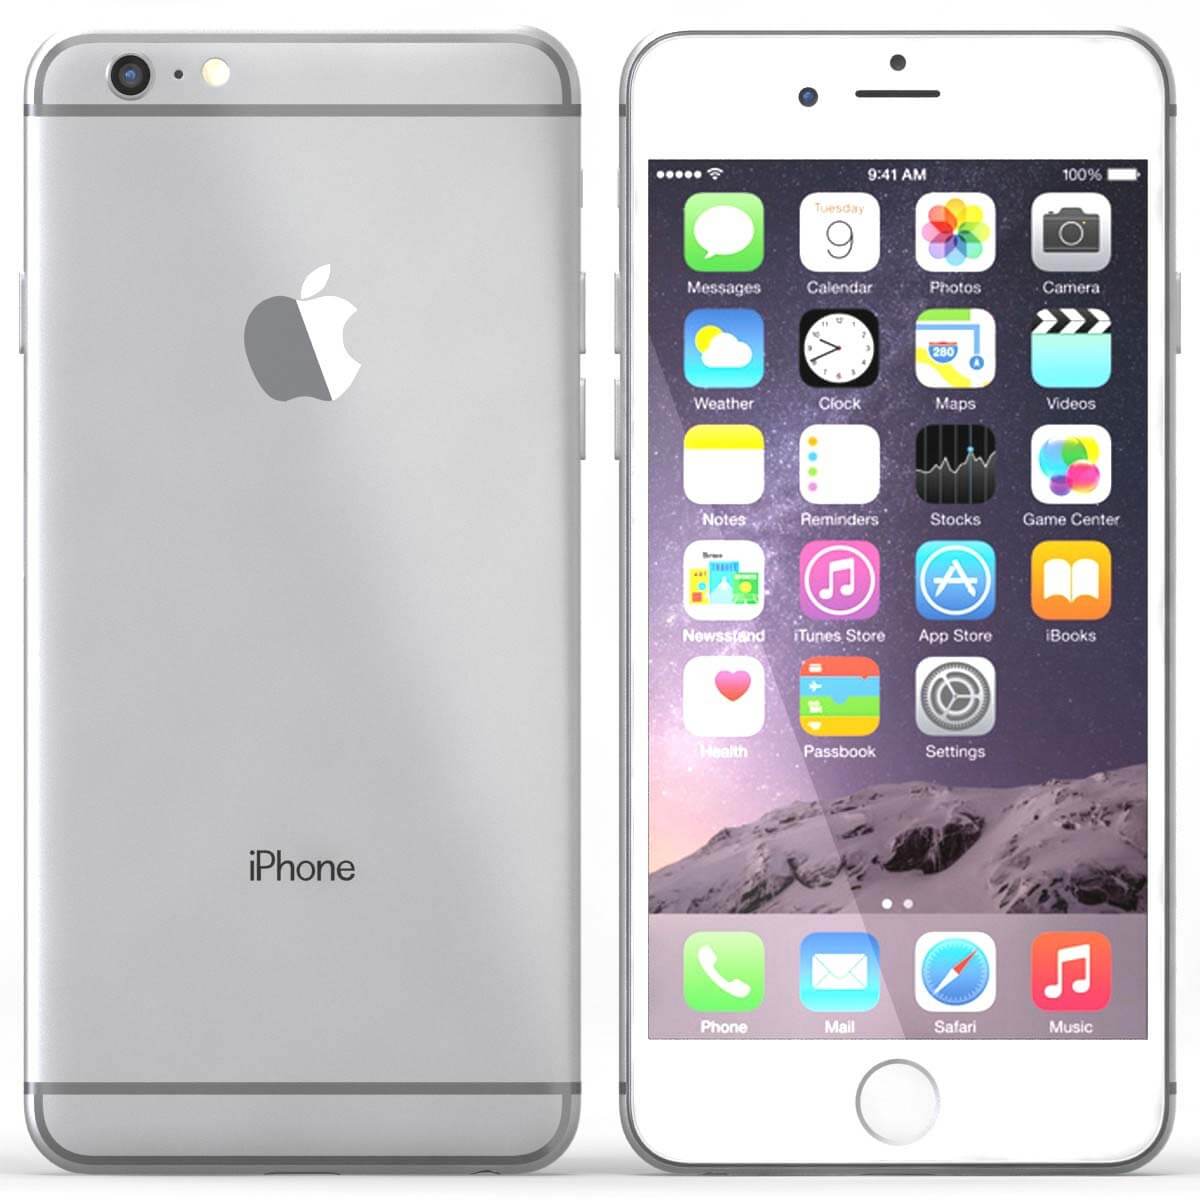 iPhone 6 S (space grey colour)